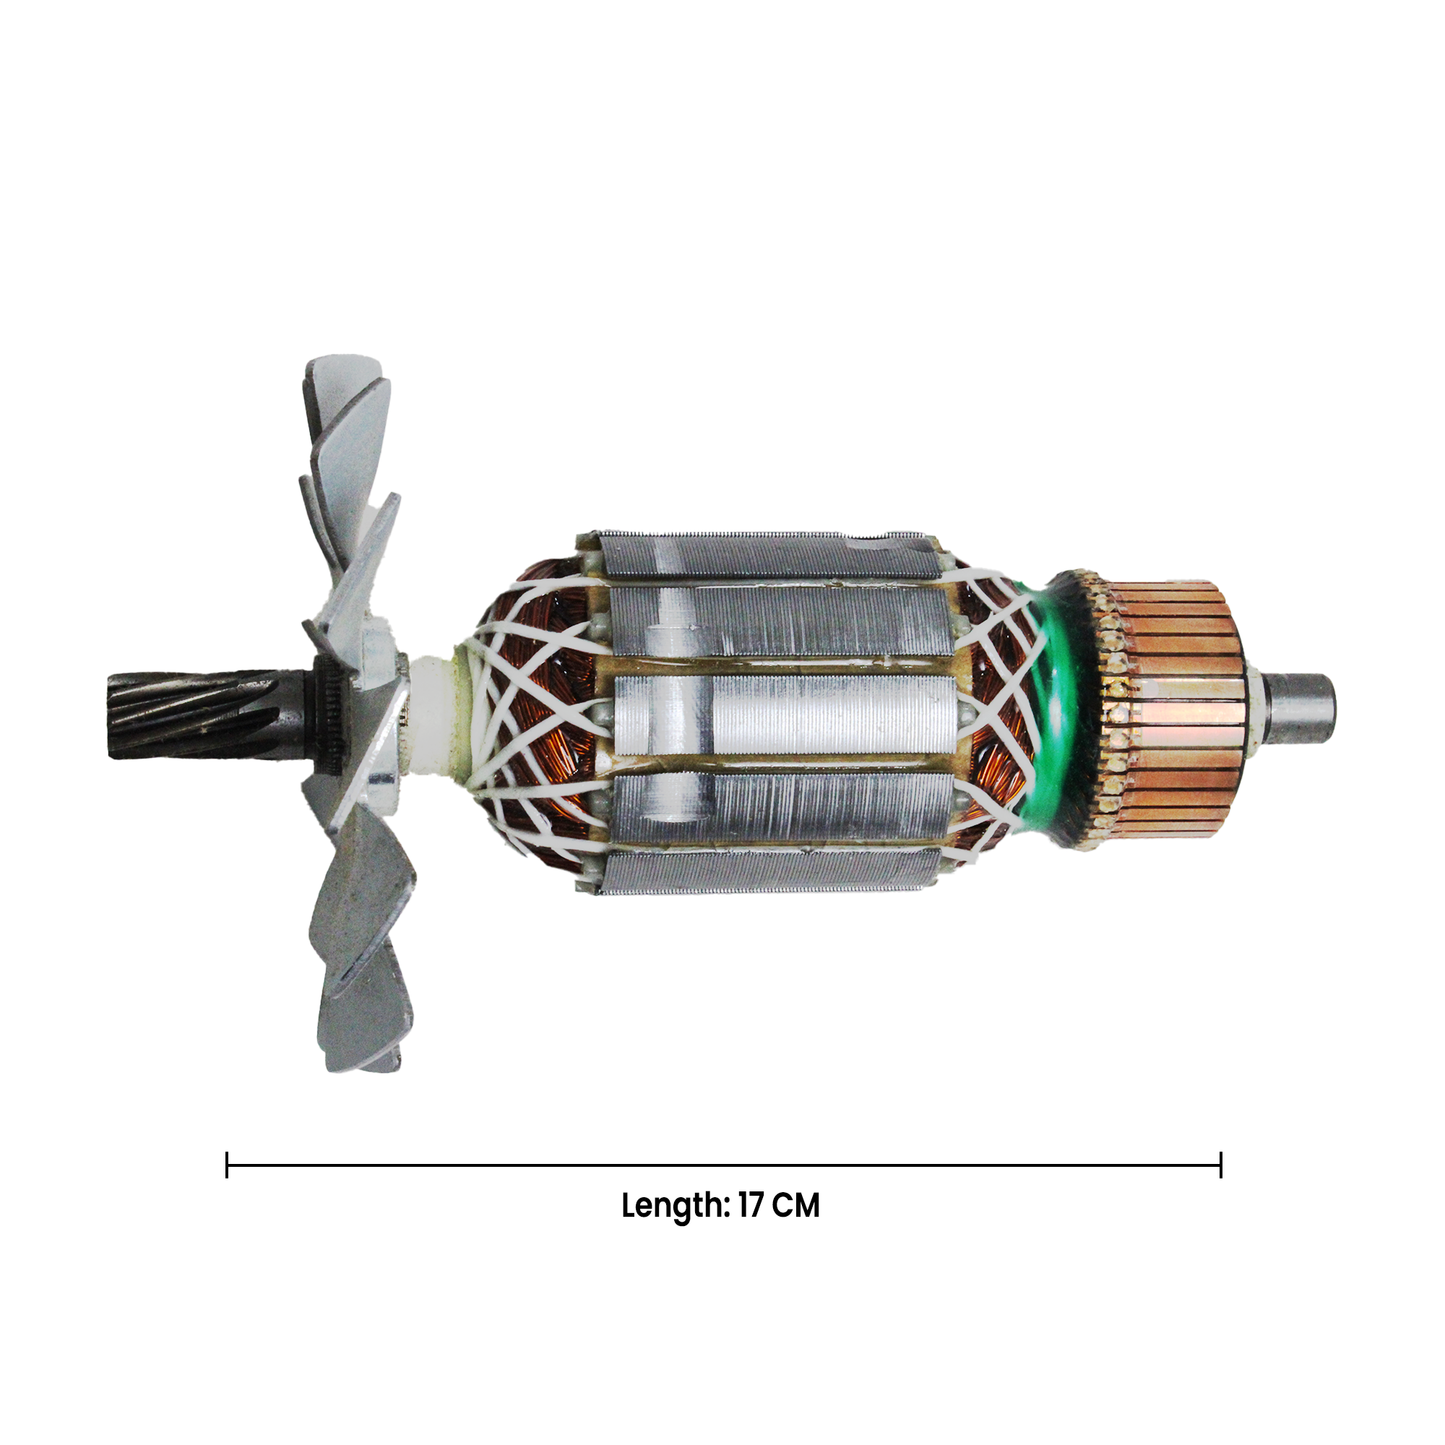 Aegon ACWF5016 -  Armature suitable for 5016 Chainsaws of other brands and generic models